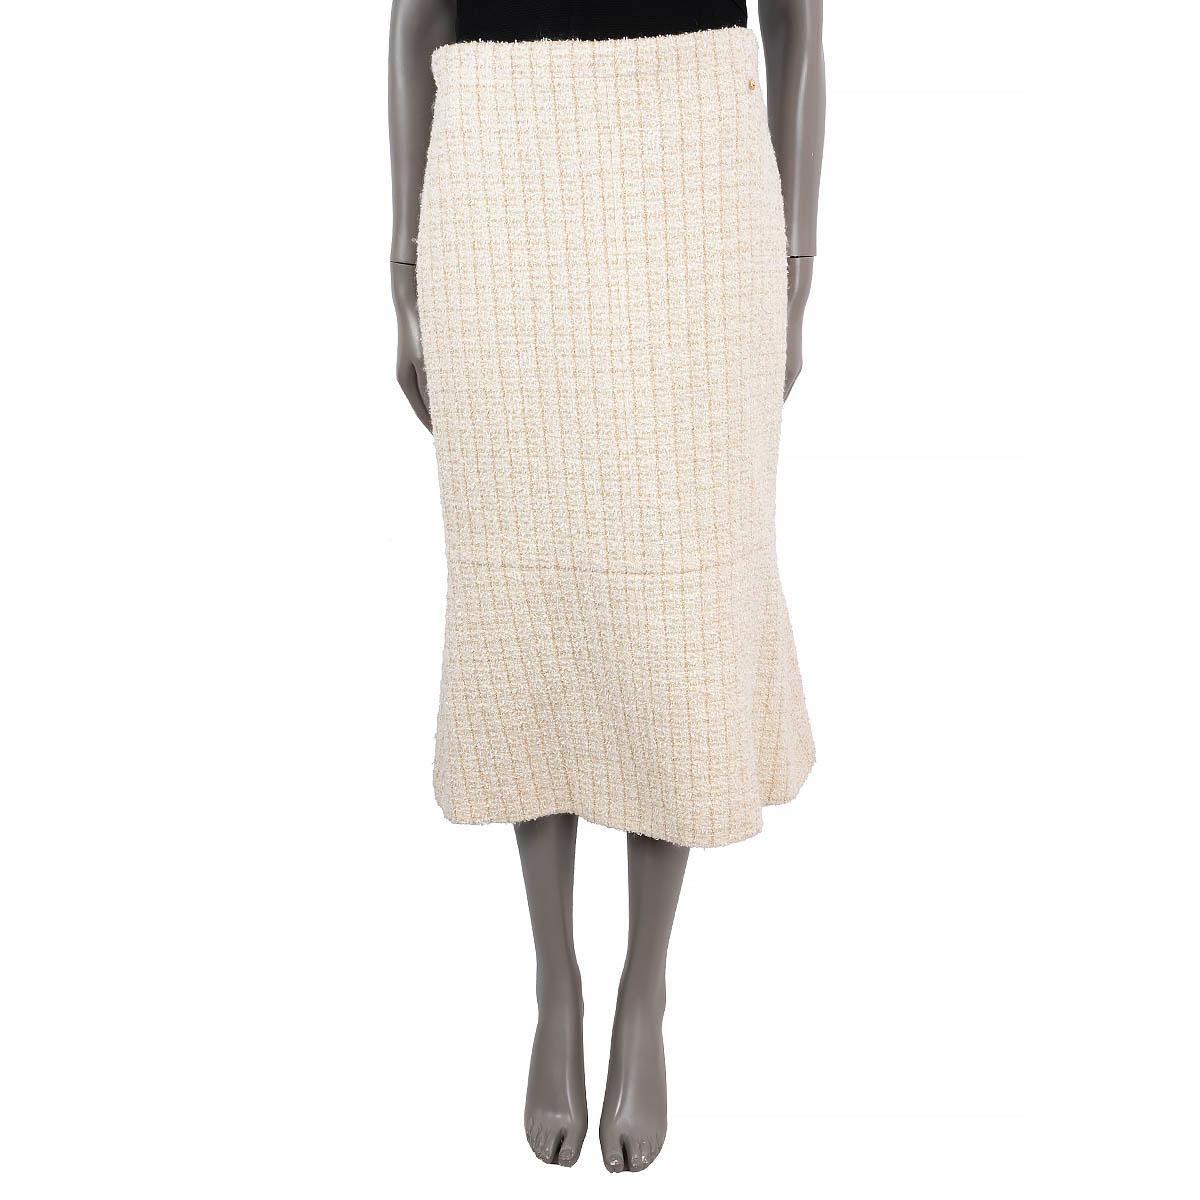 100% authentic Chanel Cosmopolite tweed midi skirt in ivory wool (33%), polyamide (31%), silk (25%), rayon (5%), mohair (3%) and polyester (3%). The design features a slightly flared bottom part, a concealed zipper and slit on the back. Lined in